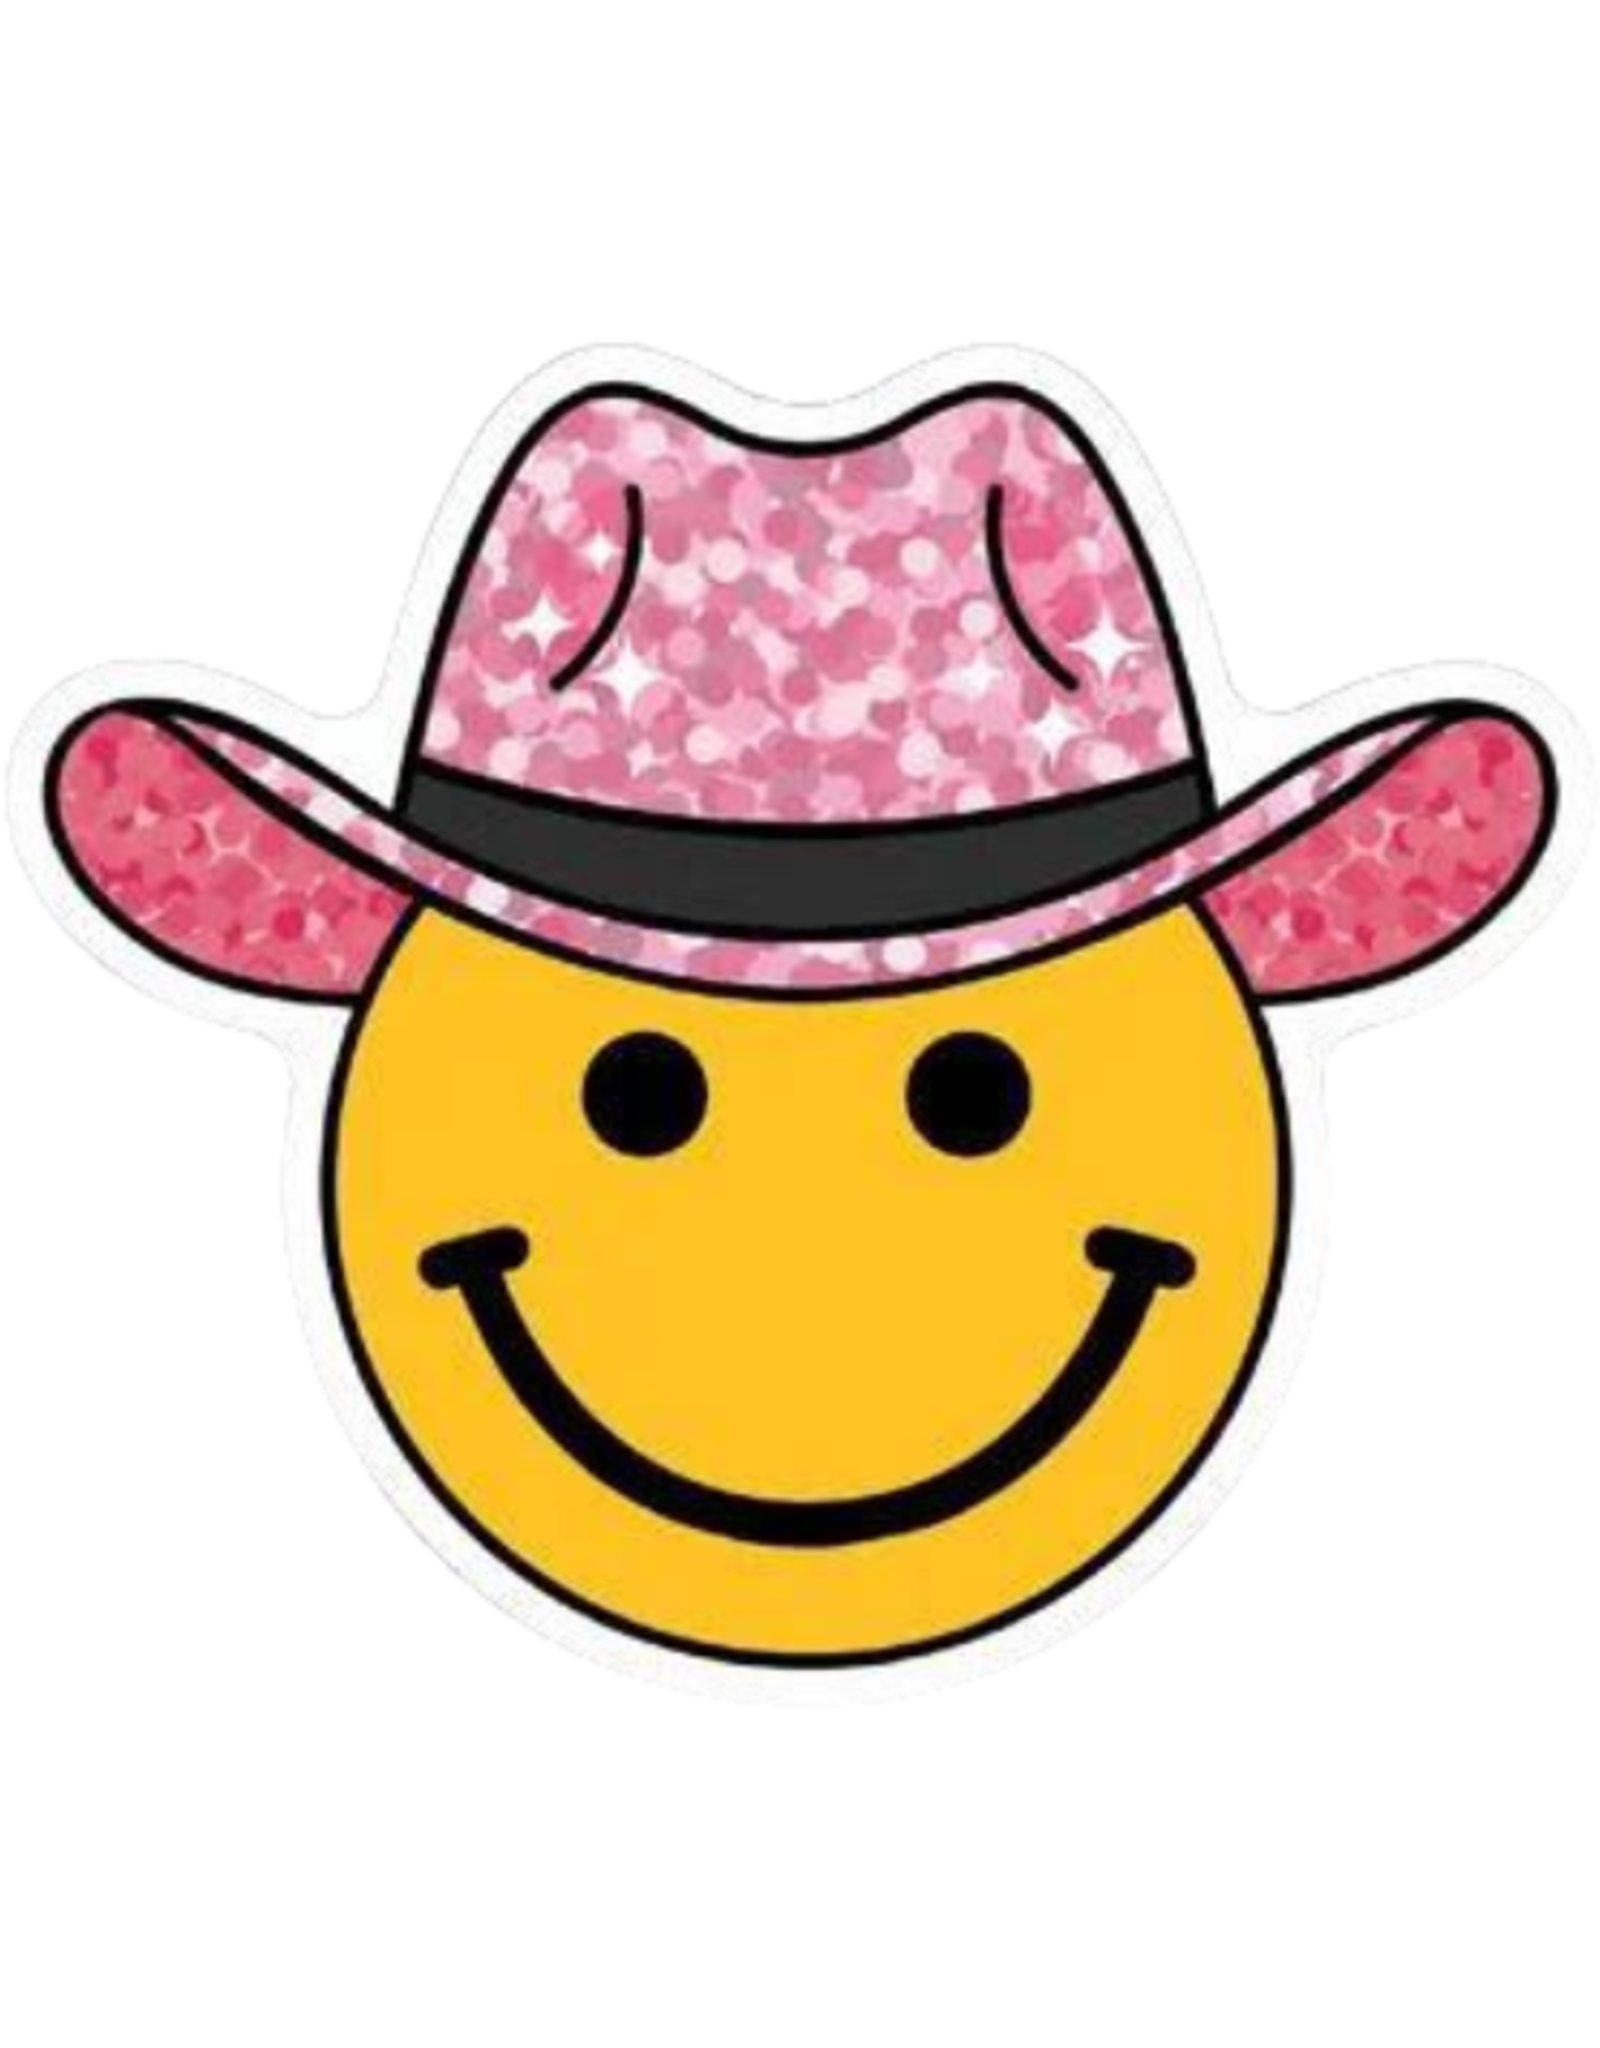 Stickers Northwest Inc. Stickers Northwest Inc - Sparkly Pink Hat Smiley Face Sticker